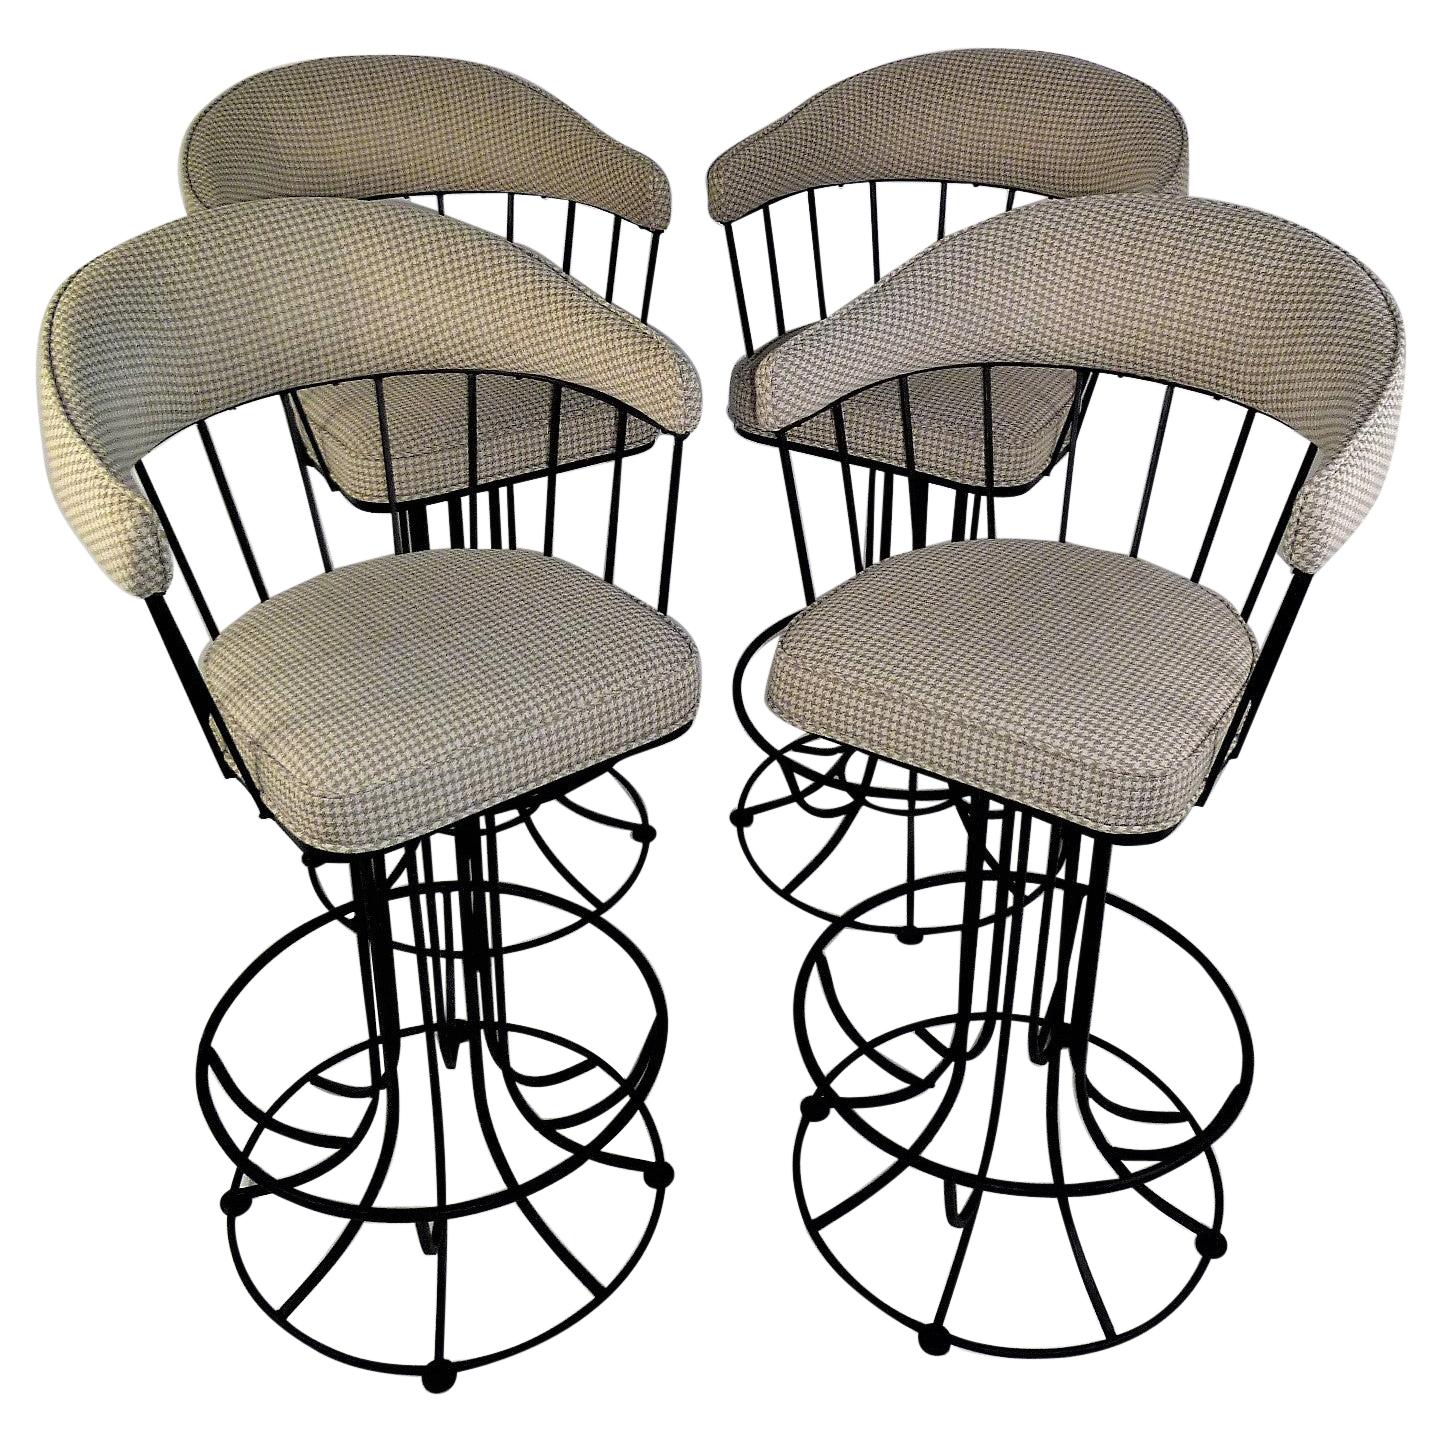 Four 1960s Swiveling Bar Stools Upholstered in Houndstooth Anton Lorenz Inspired